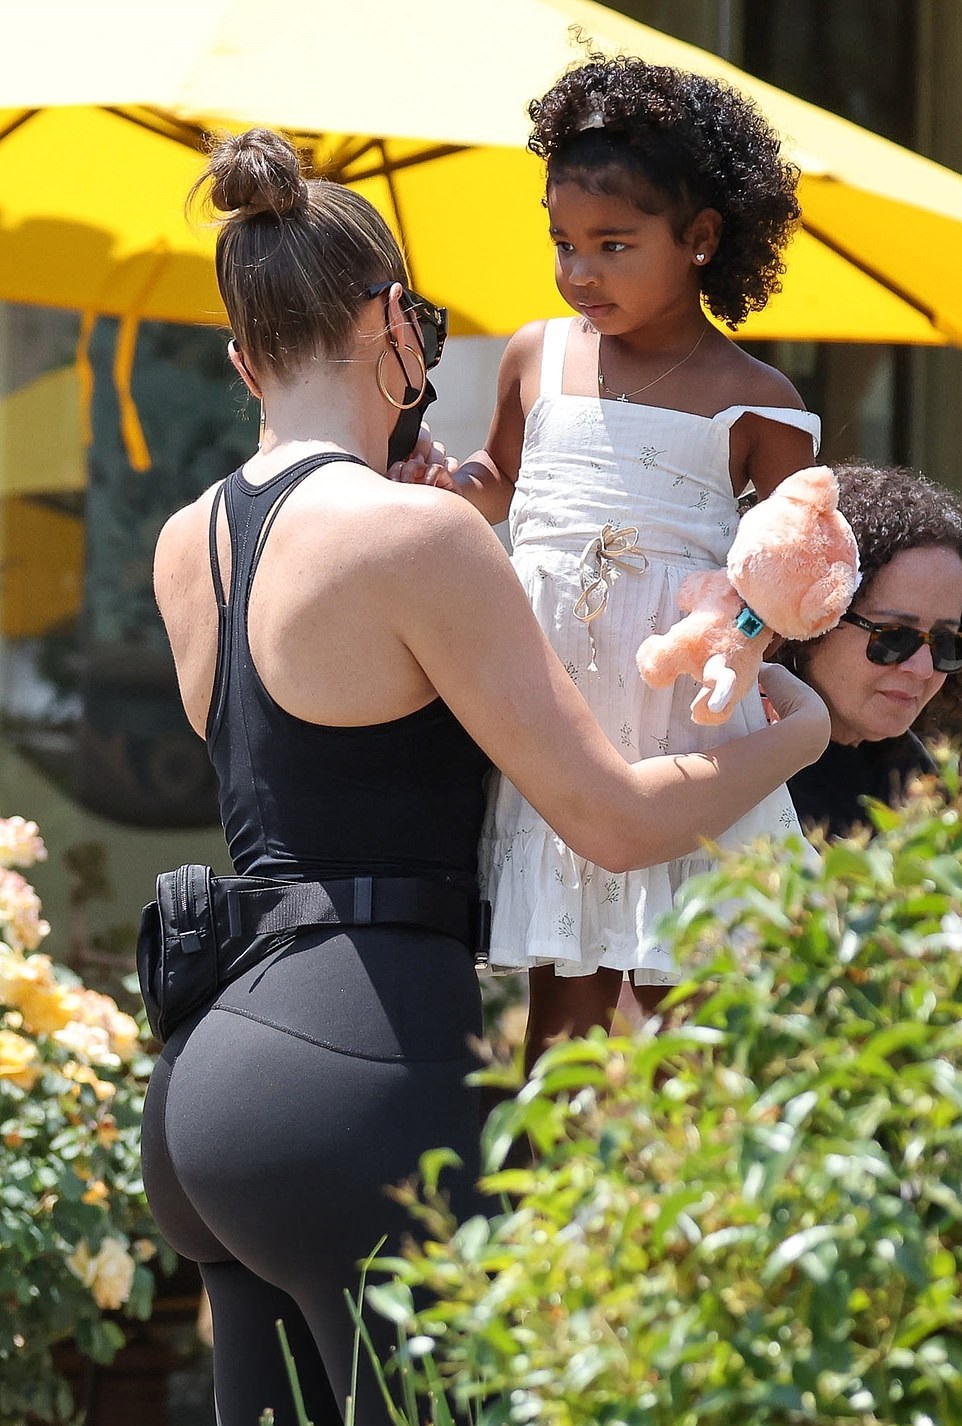 Khloe Kardashian and Tristan Thompson seen together as they take their daughter for lunch in Calabasas